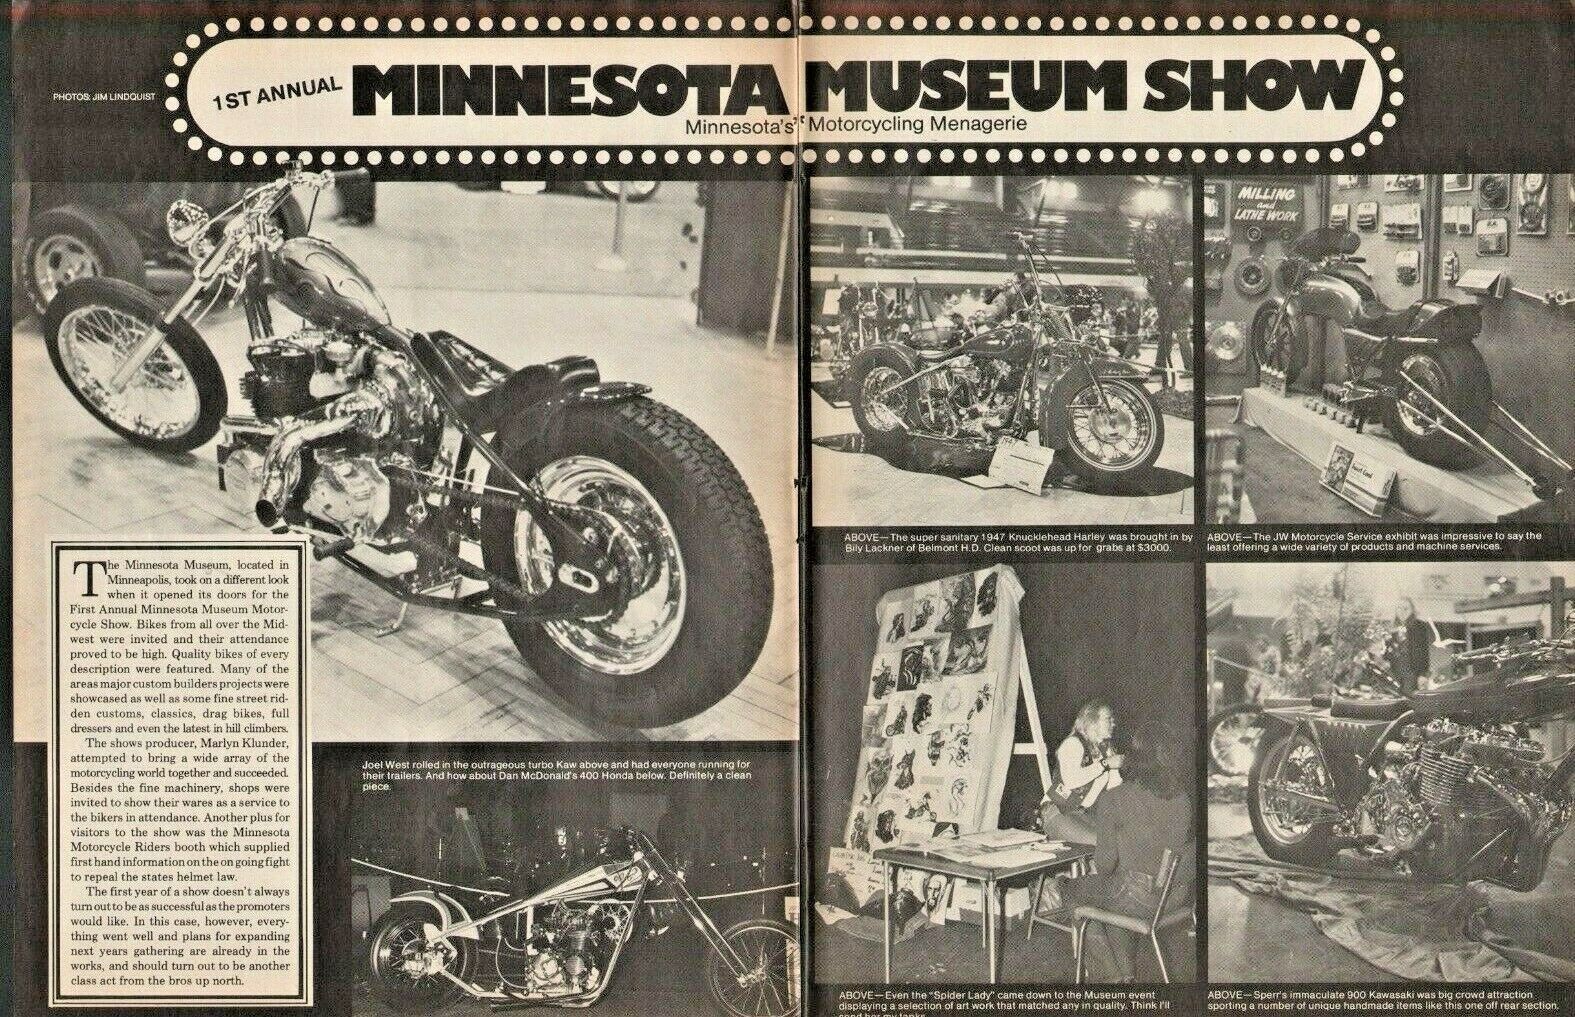 1980 Minneapolis Minnesota Museum Motorcycle Show - 4-Page Vintage Article